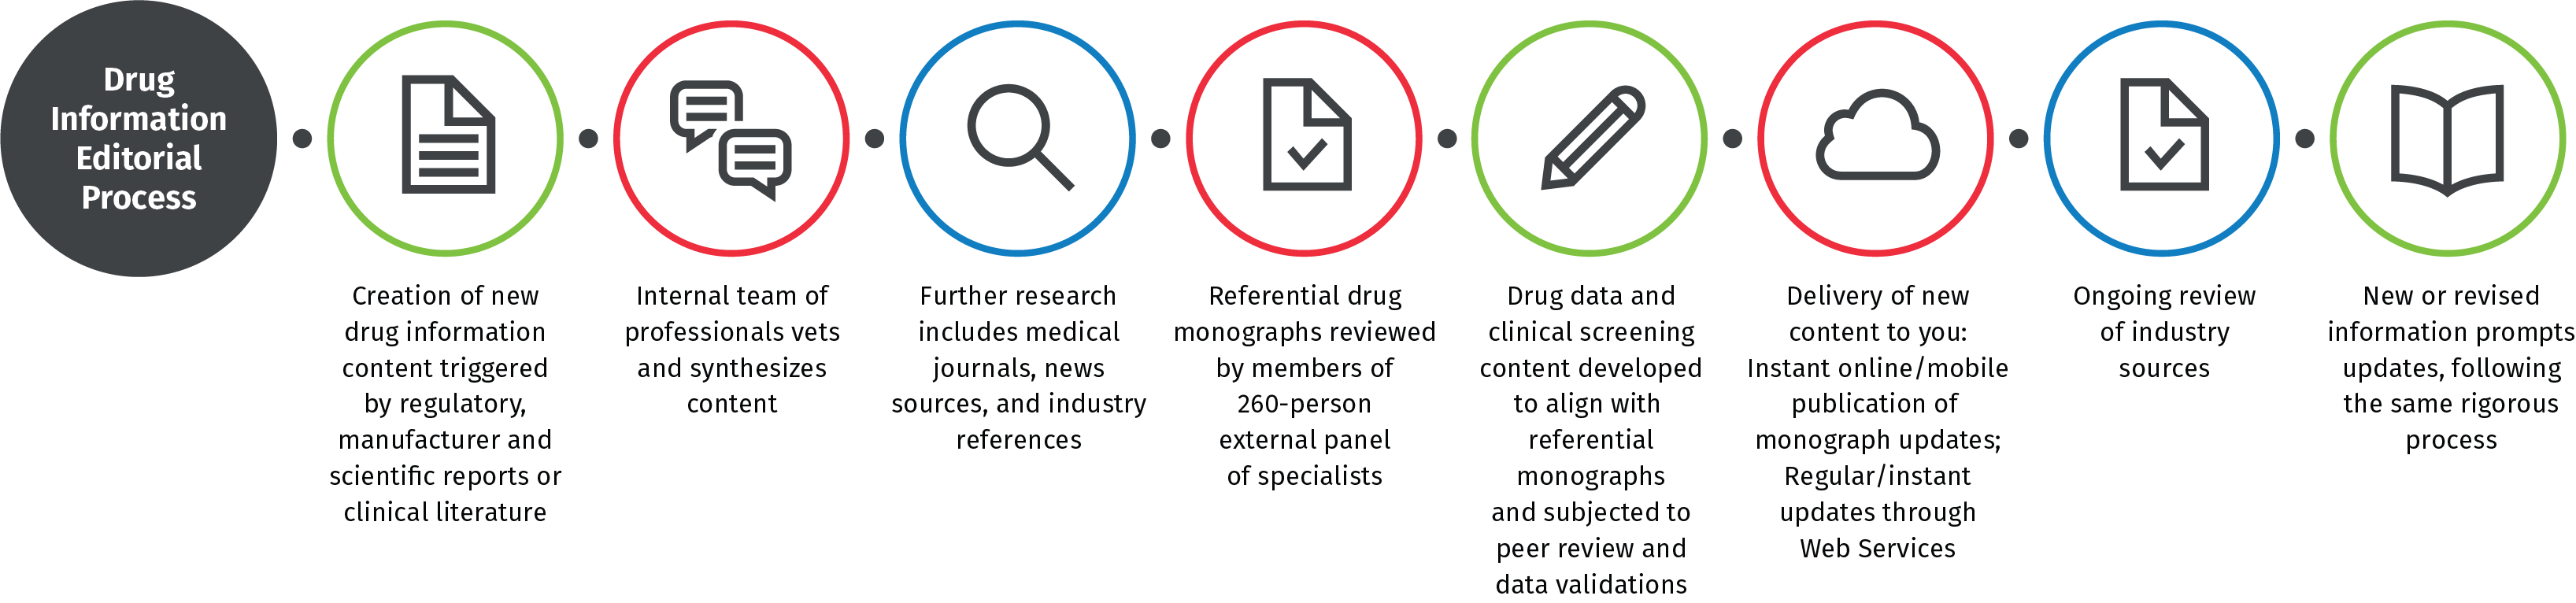 graphic of drug information editorial process